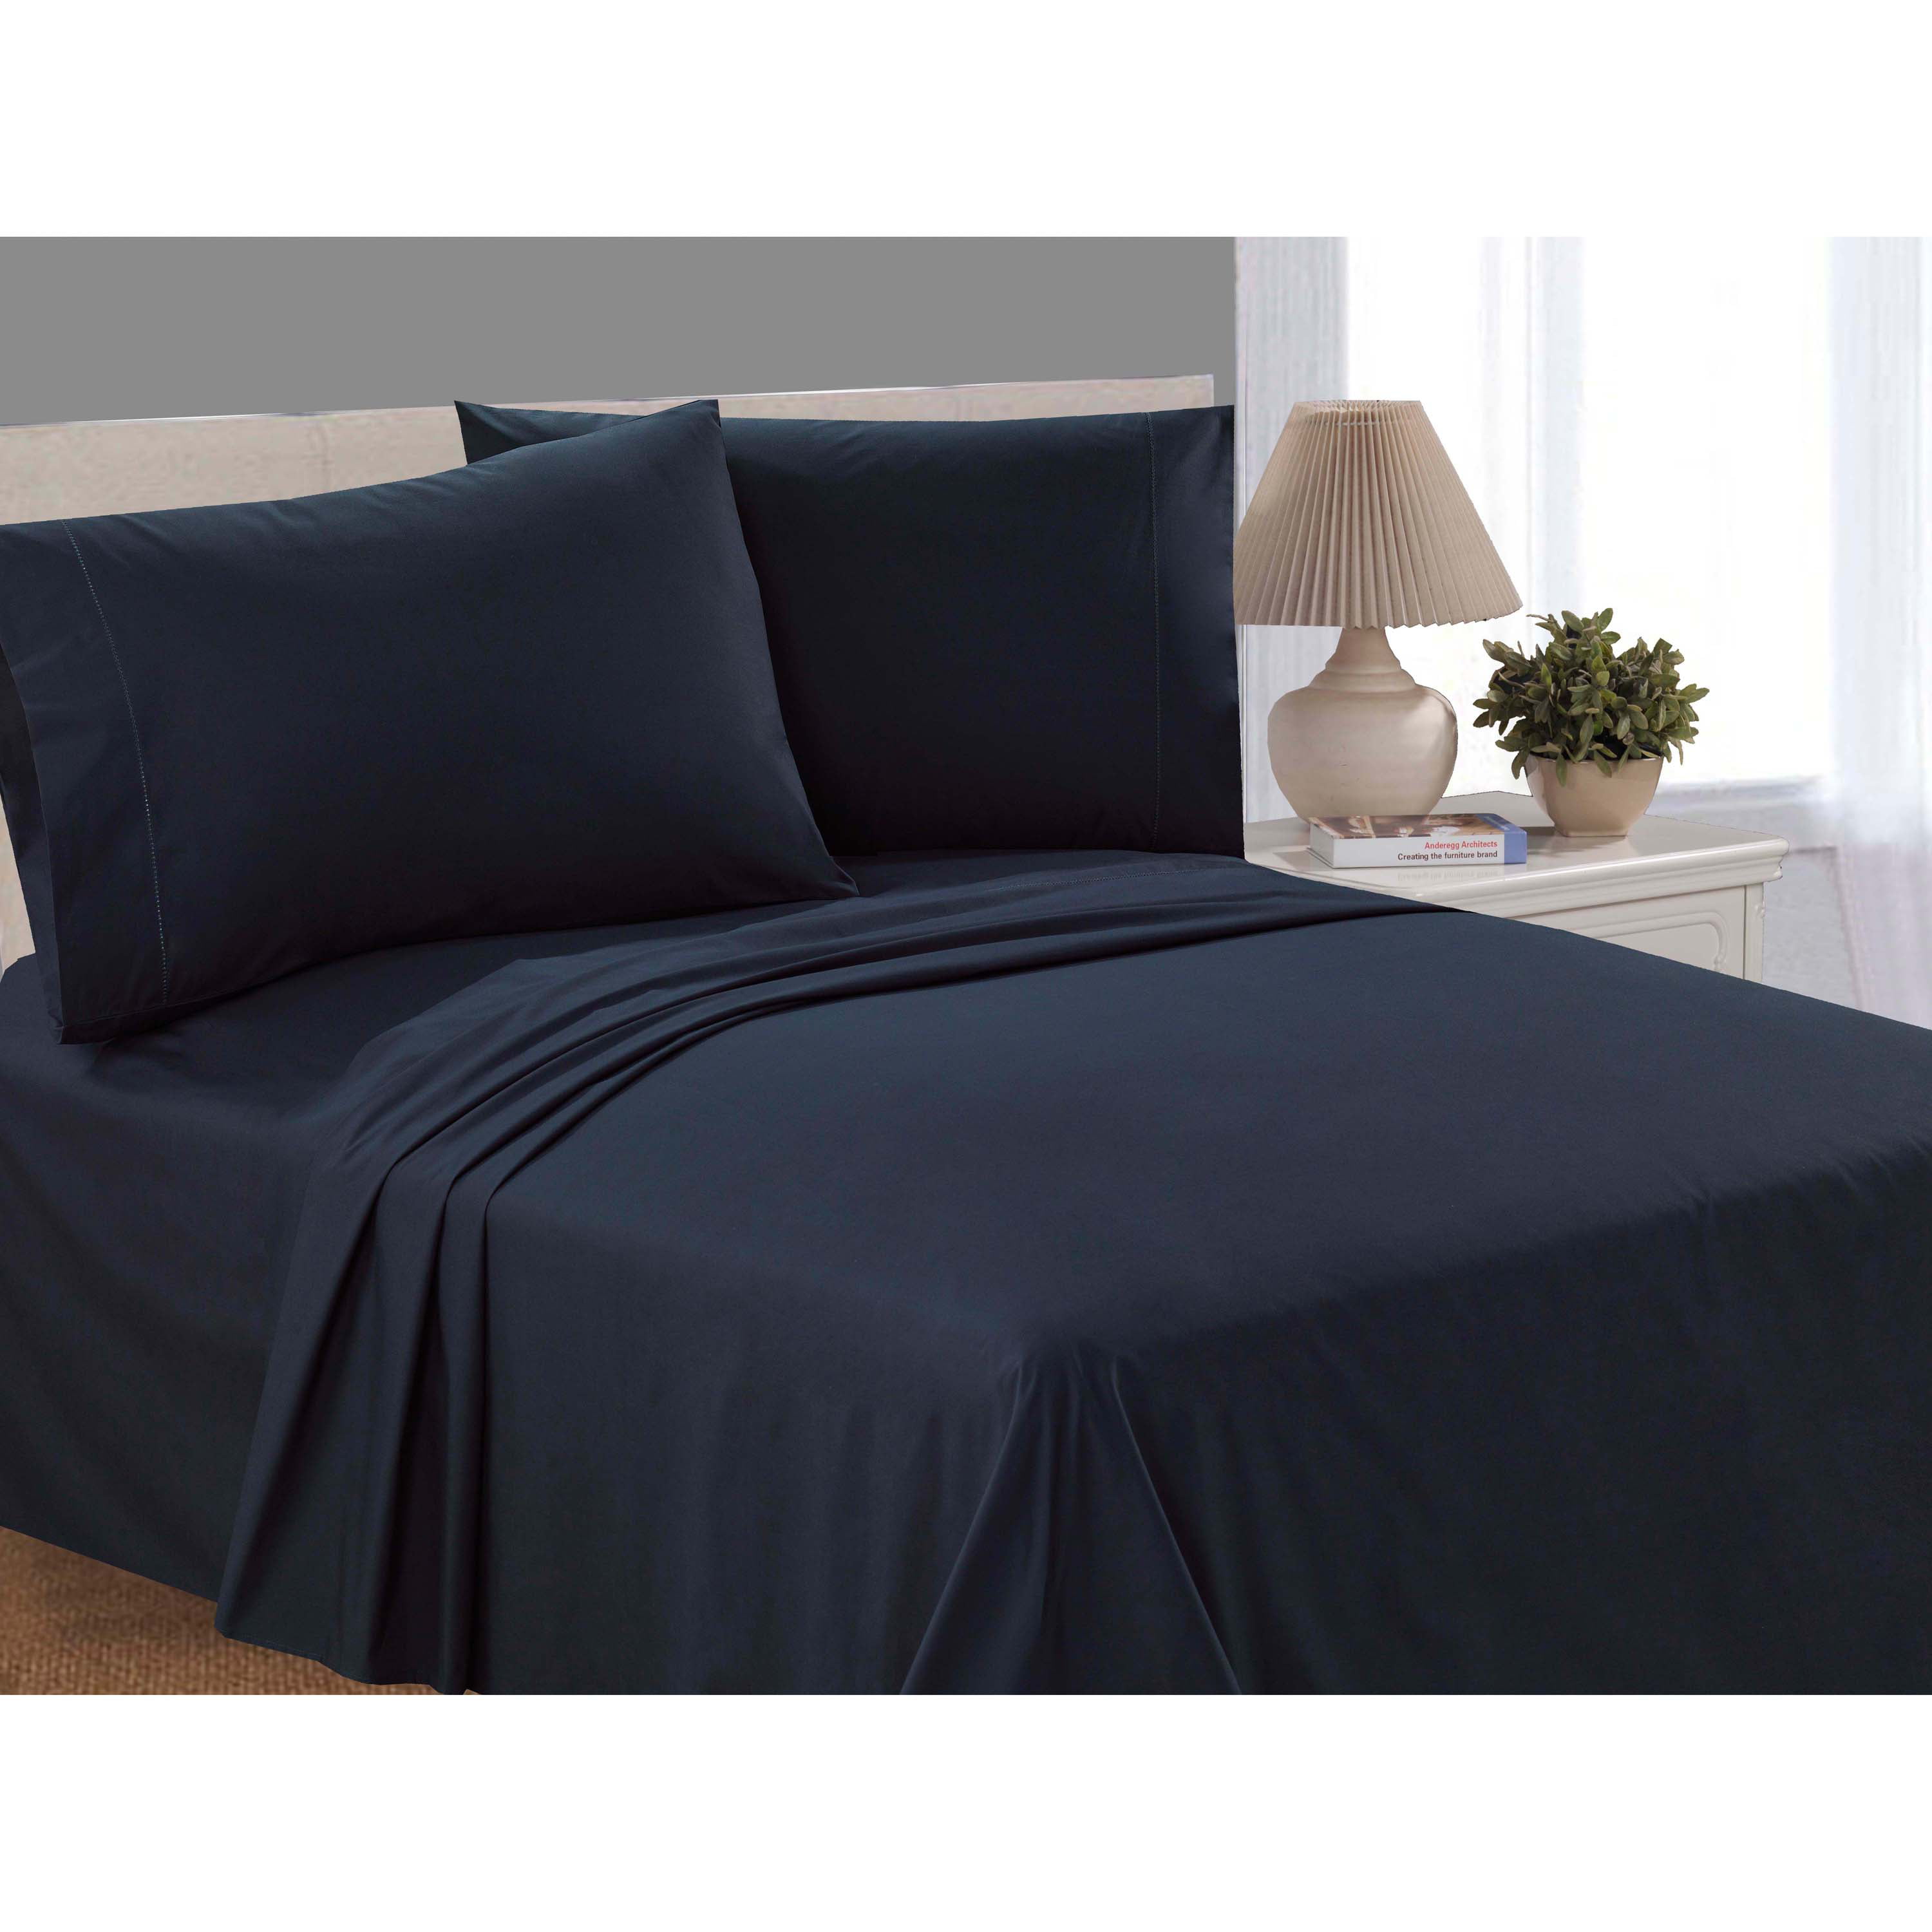 200 count percale sheets